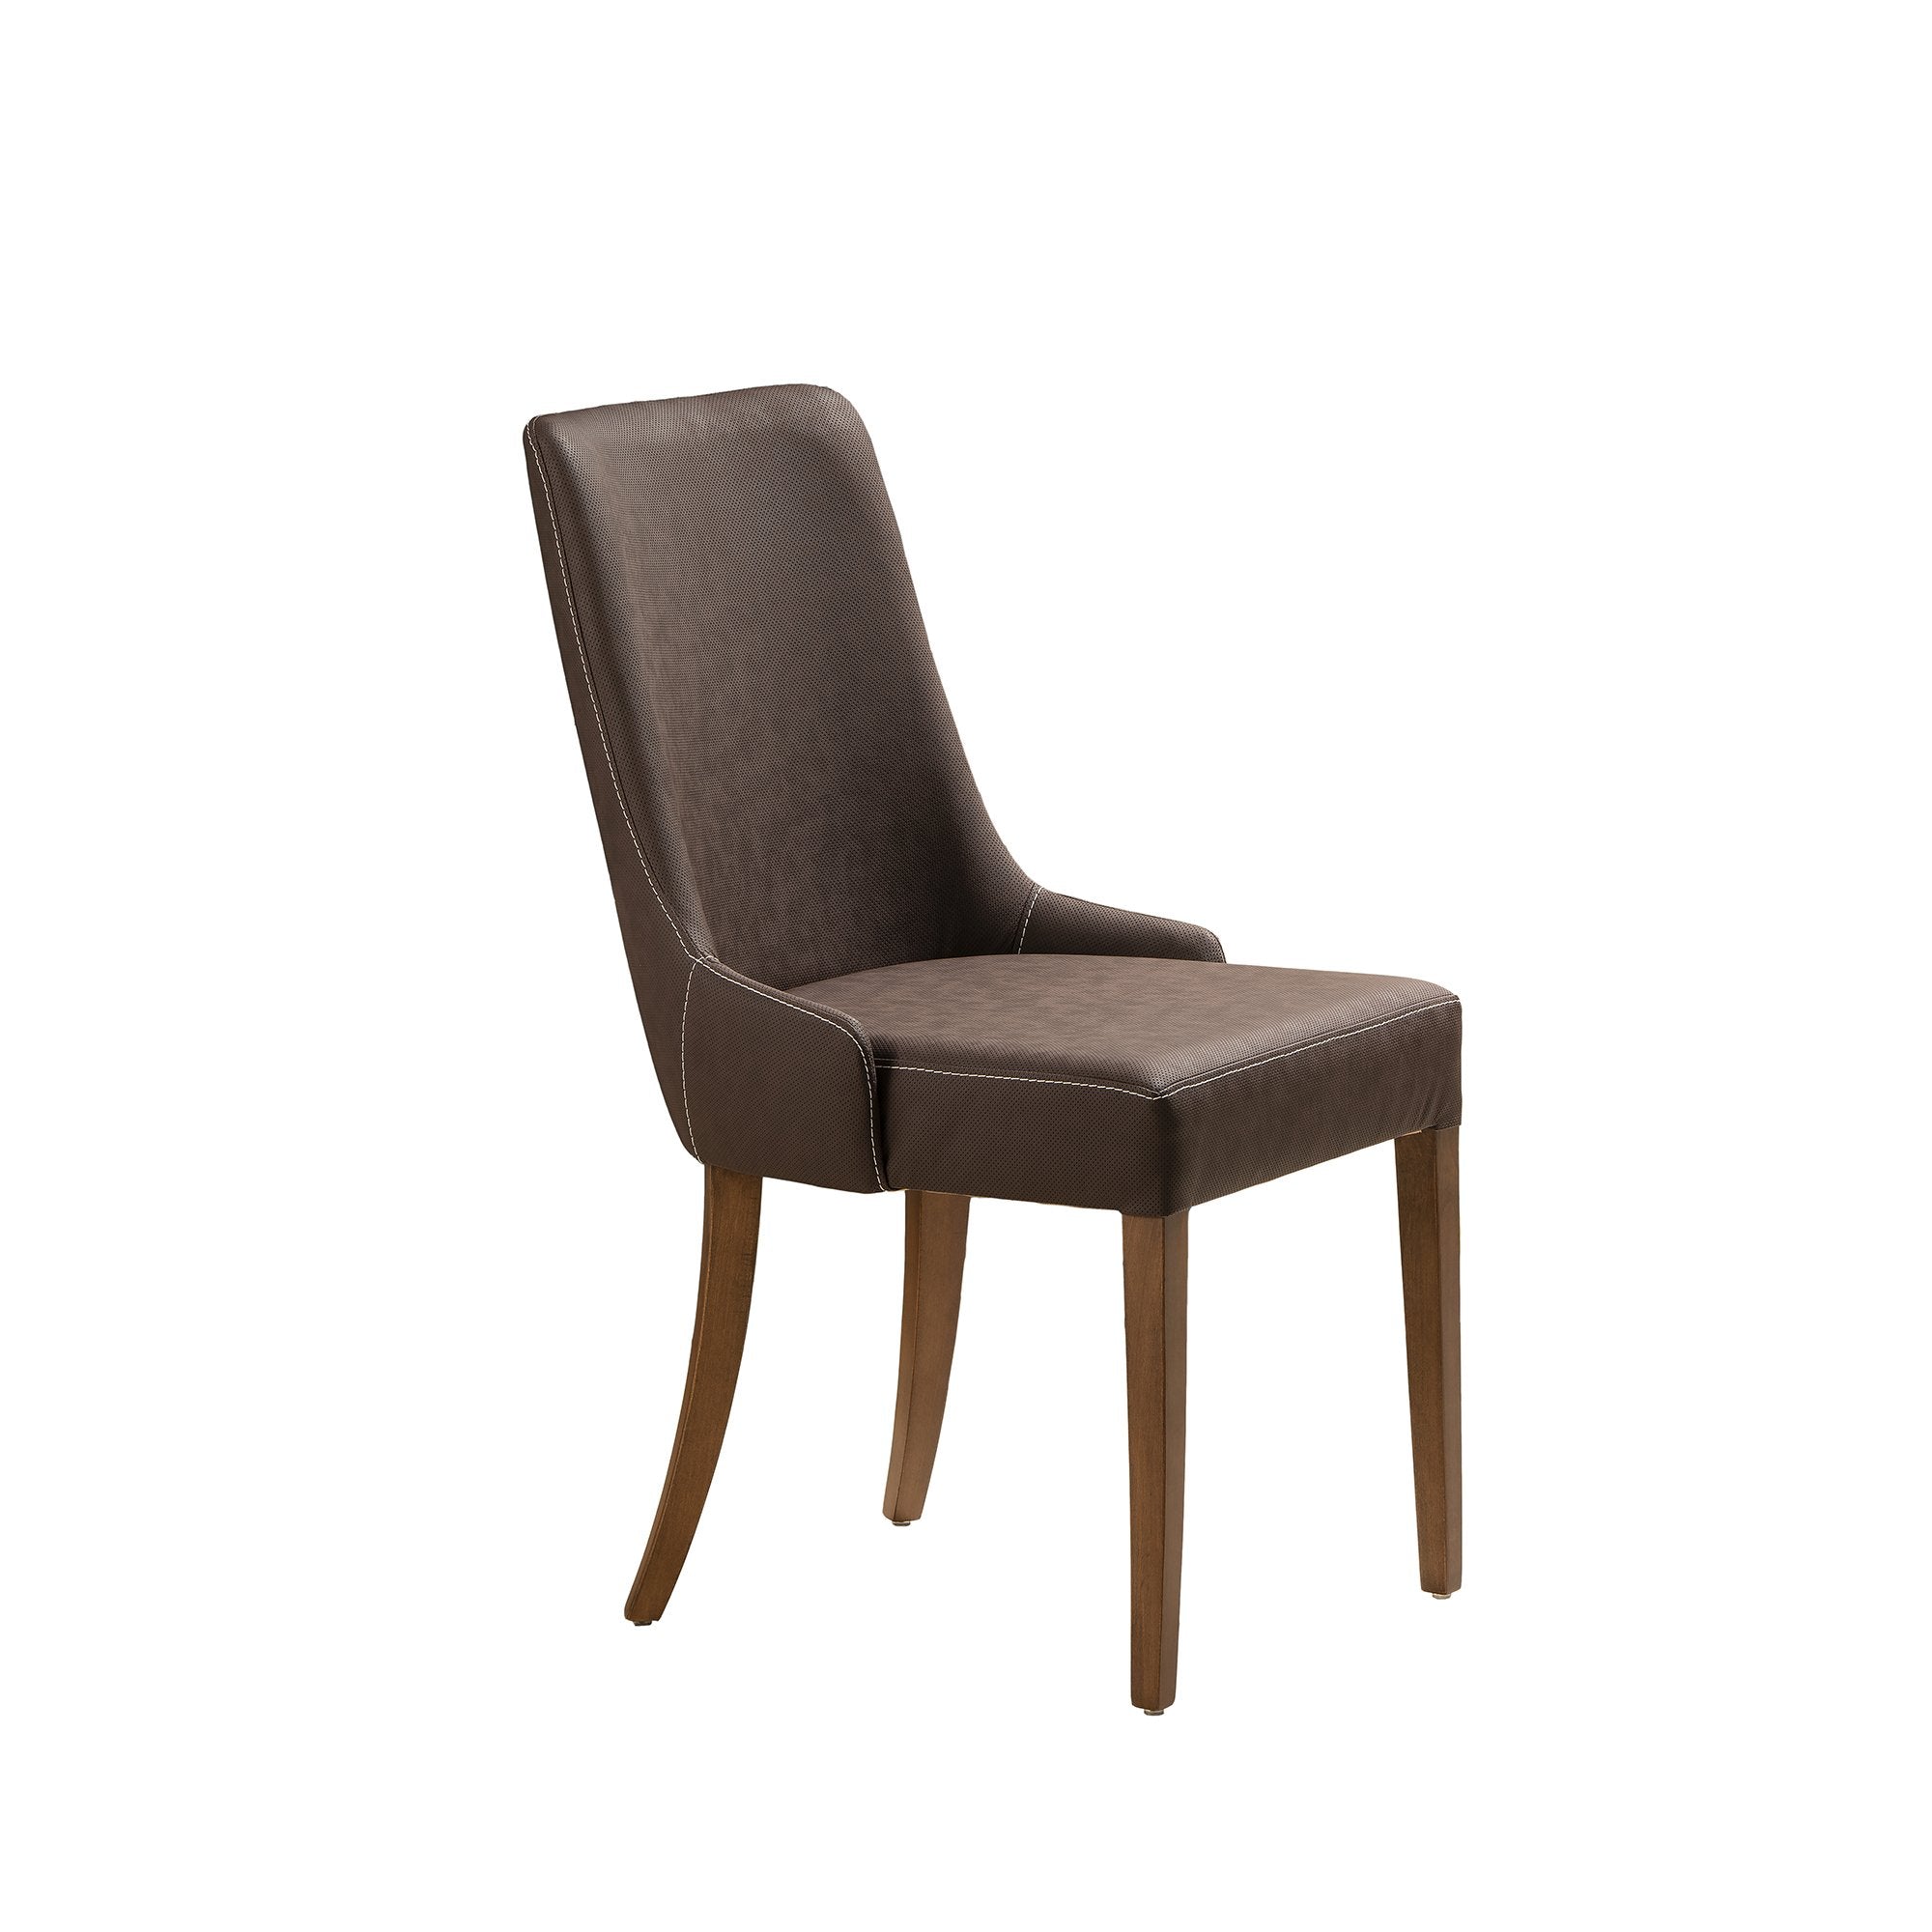 Golden Upholstered Solid Wood Chair - Set of 2 - Brown & Walnut - 36.2" H x 17.9" W x 20" D - Decorotika